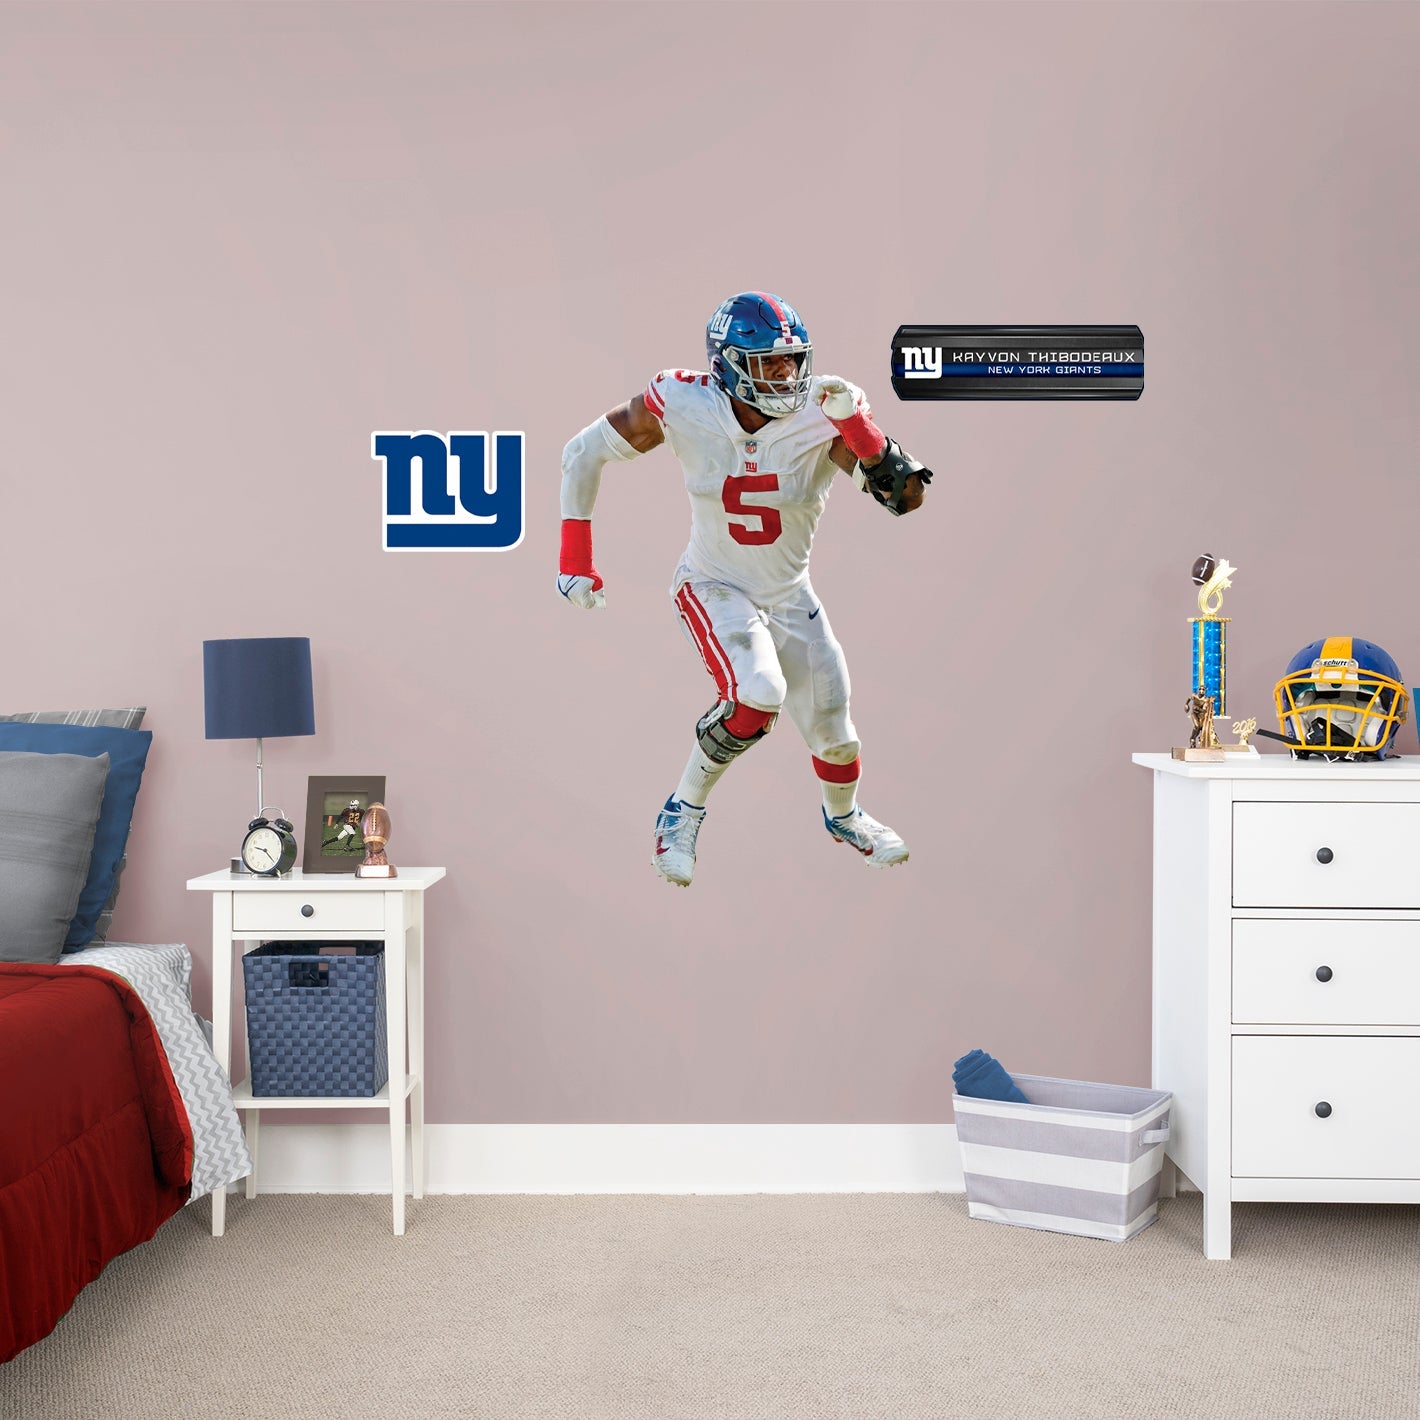 New York Giants: Kayvon Thibodeaux - Officially Licensed NFL Removable Adhesive Decal